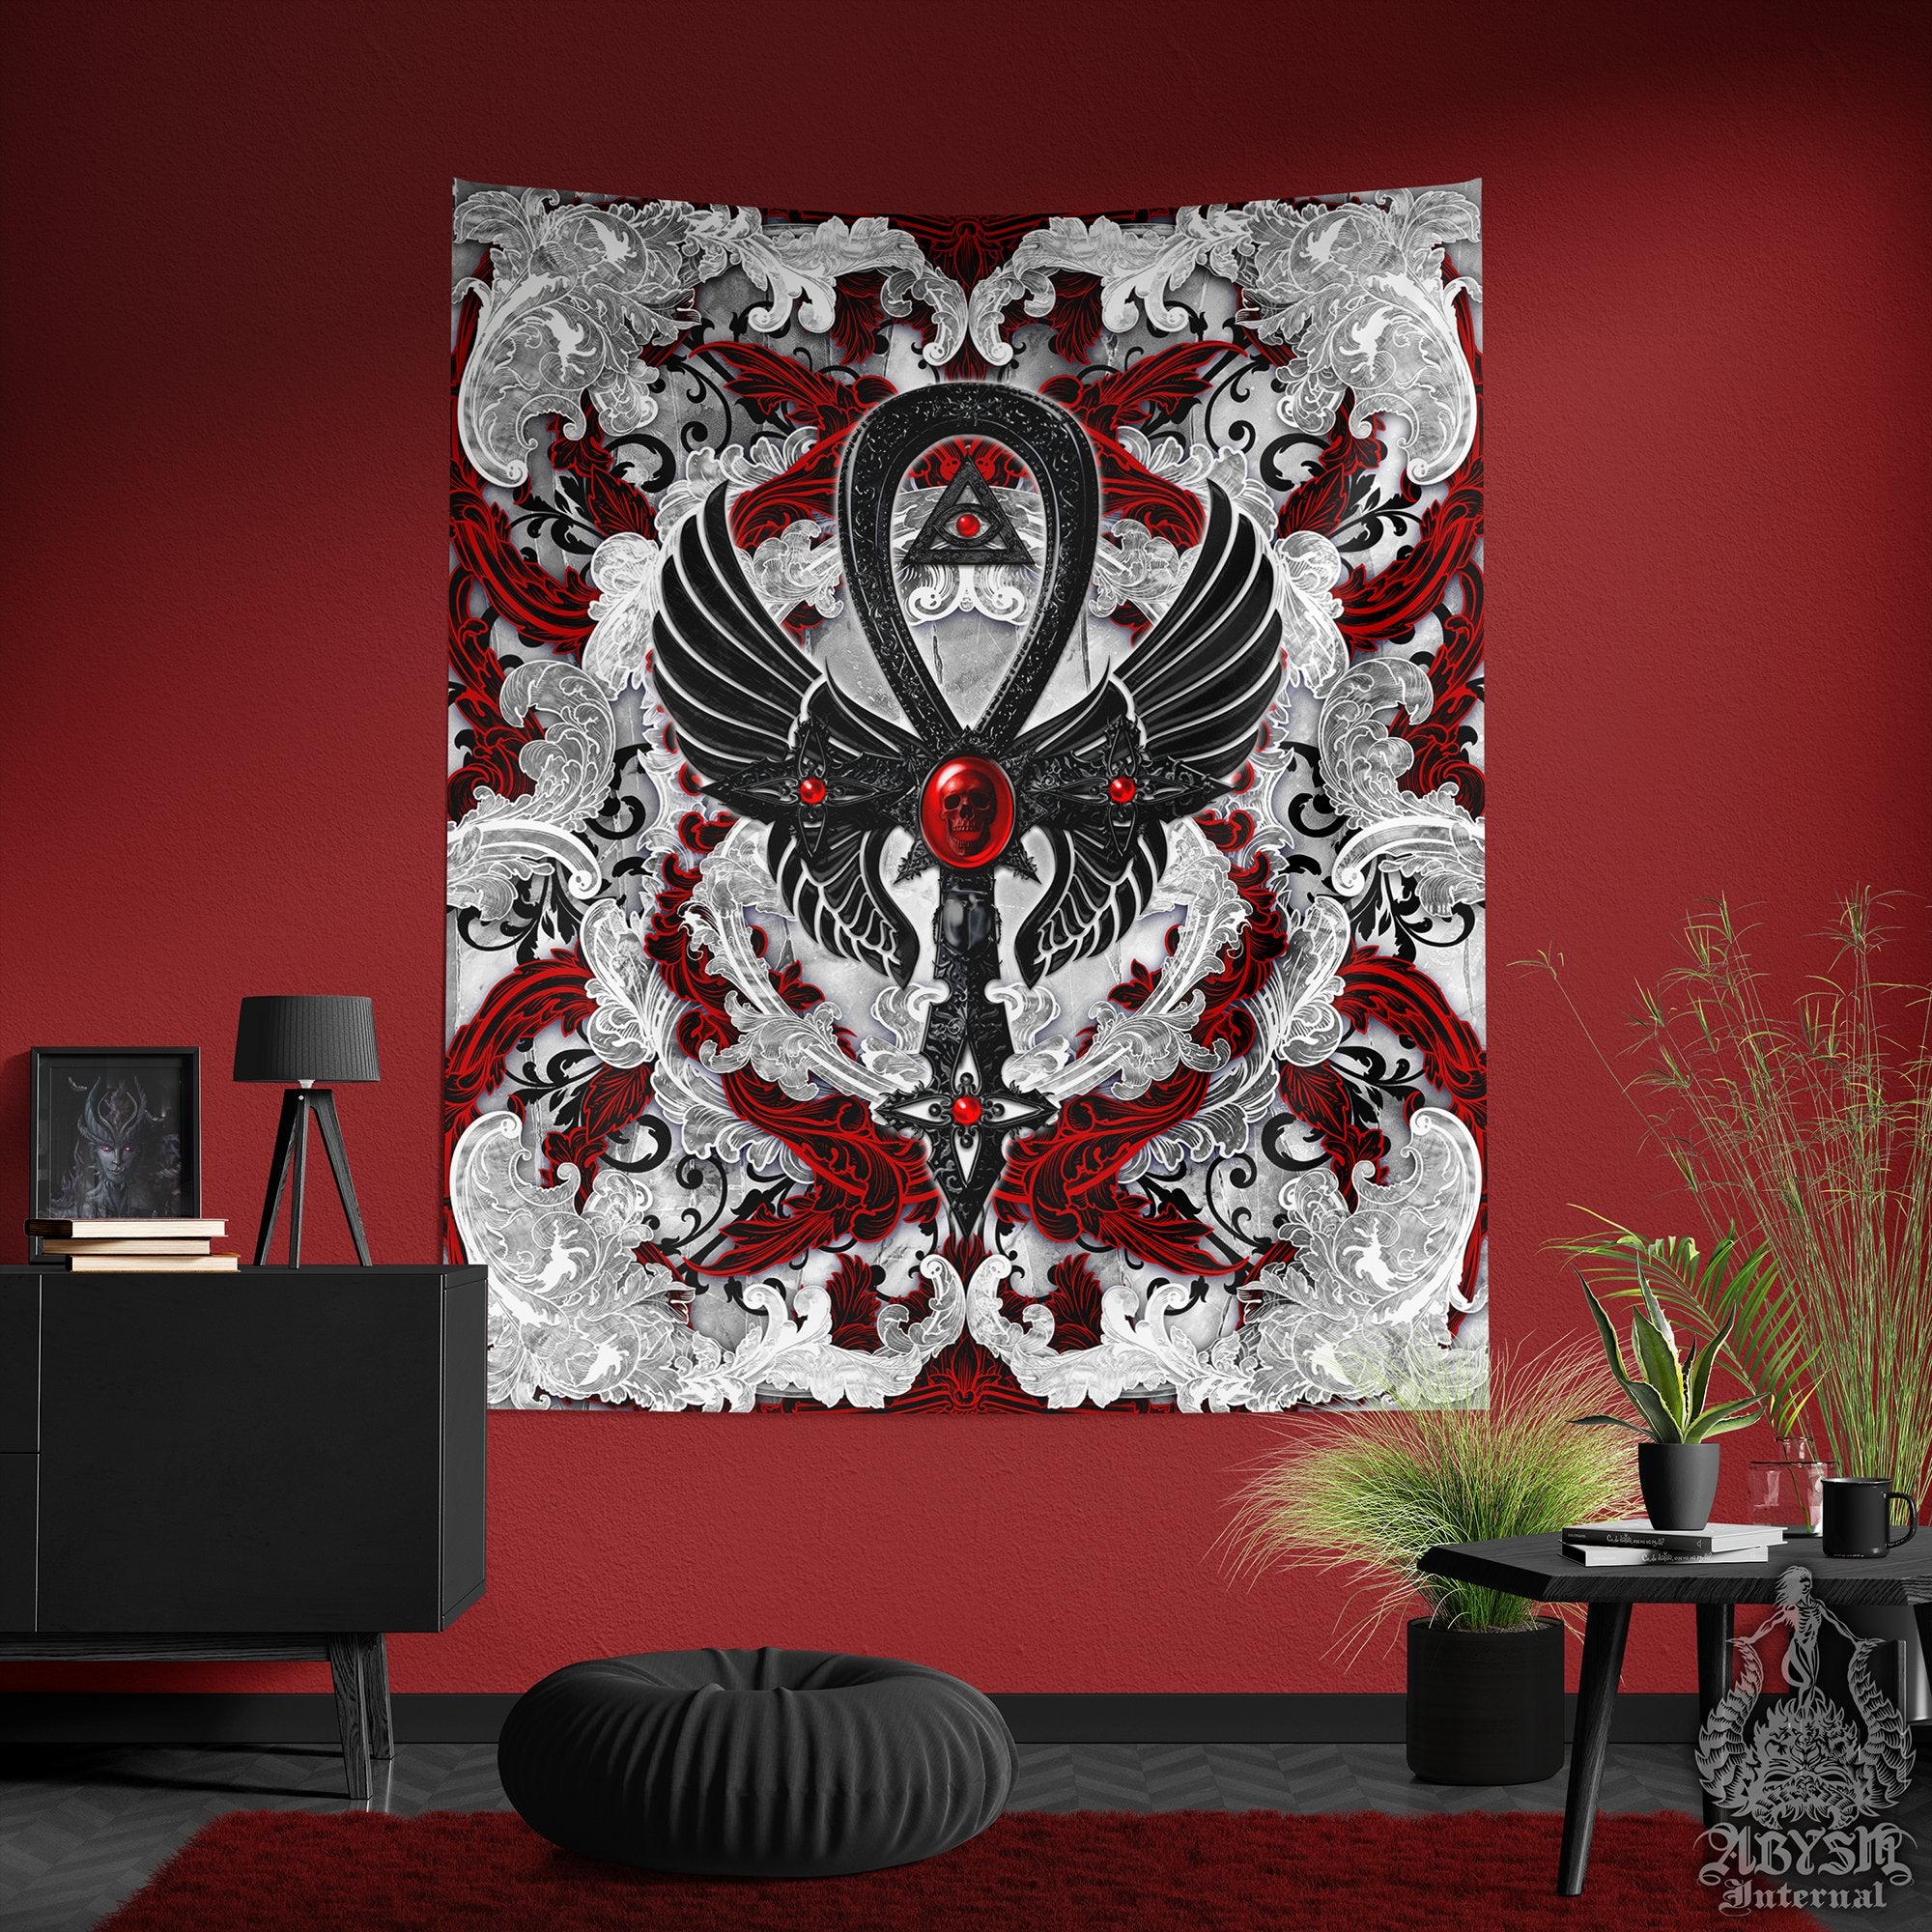 Bloody White Goth Tapestry, Gothic Ankh Wall Hanging, Cross, Occult Home Decor, Vertical Art Print - Red, Black, 3 Colors - Abysm Internal